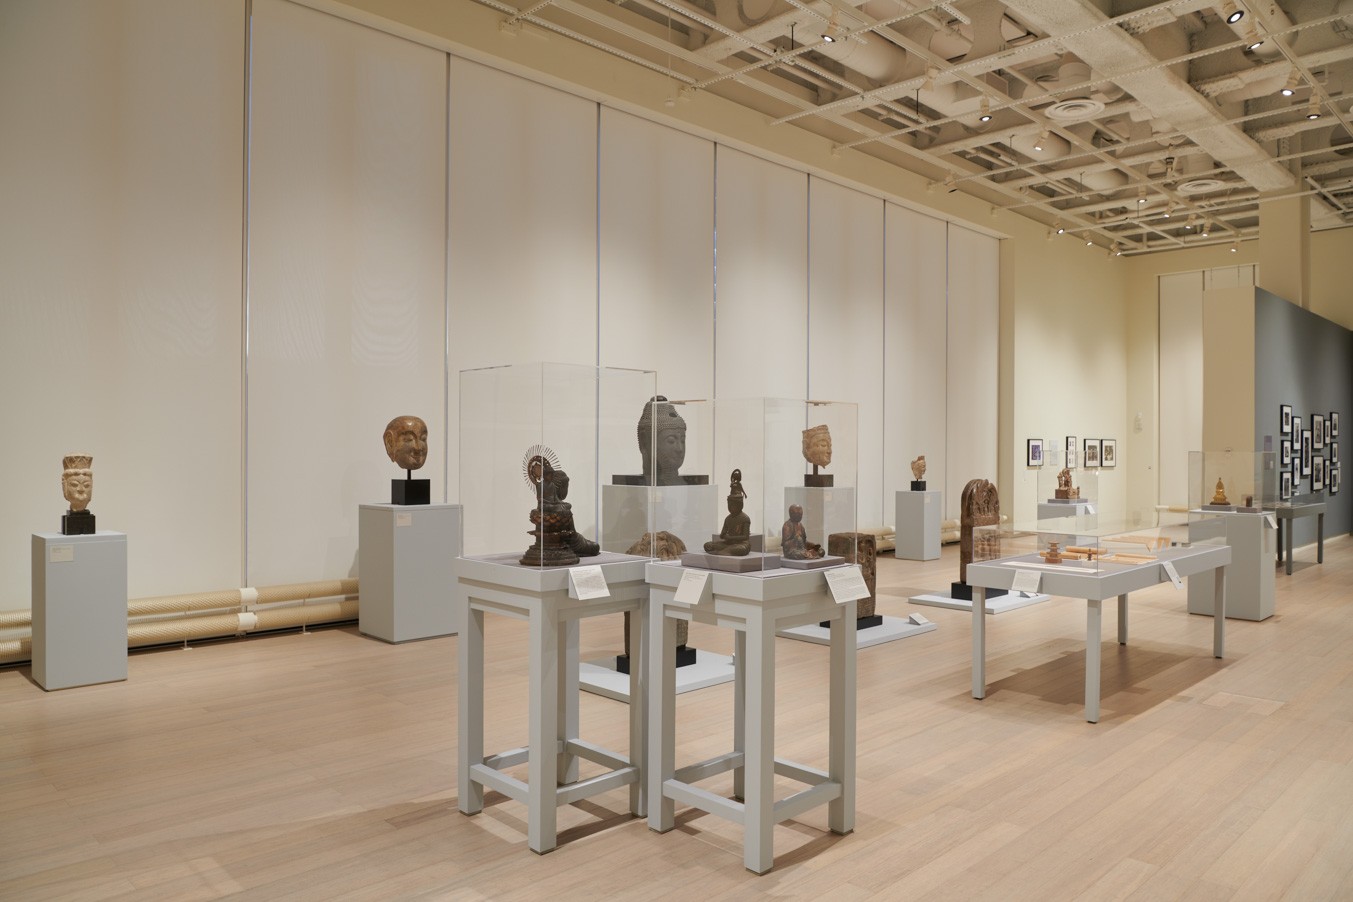 Installation view of the exhibition "What Is the Use of Buddhist Art?", on view at the Wallach Art Gallery, Columbia University December 4, 2021-March 12, 2022.